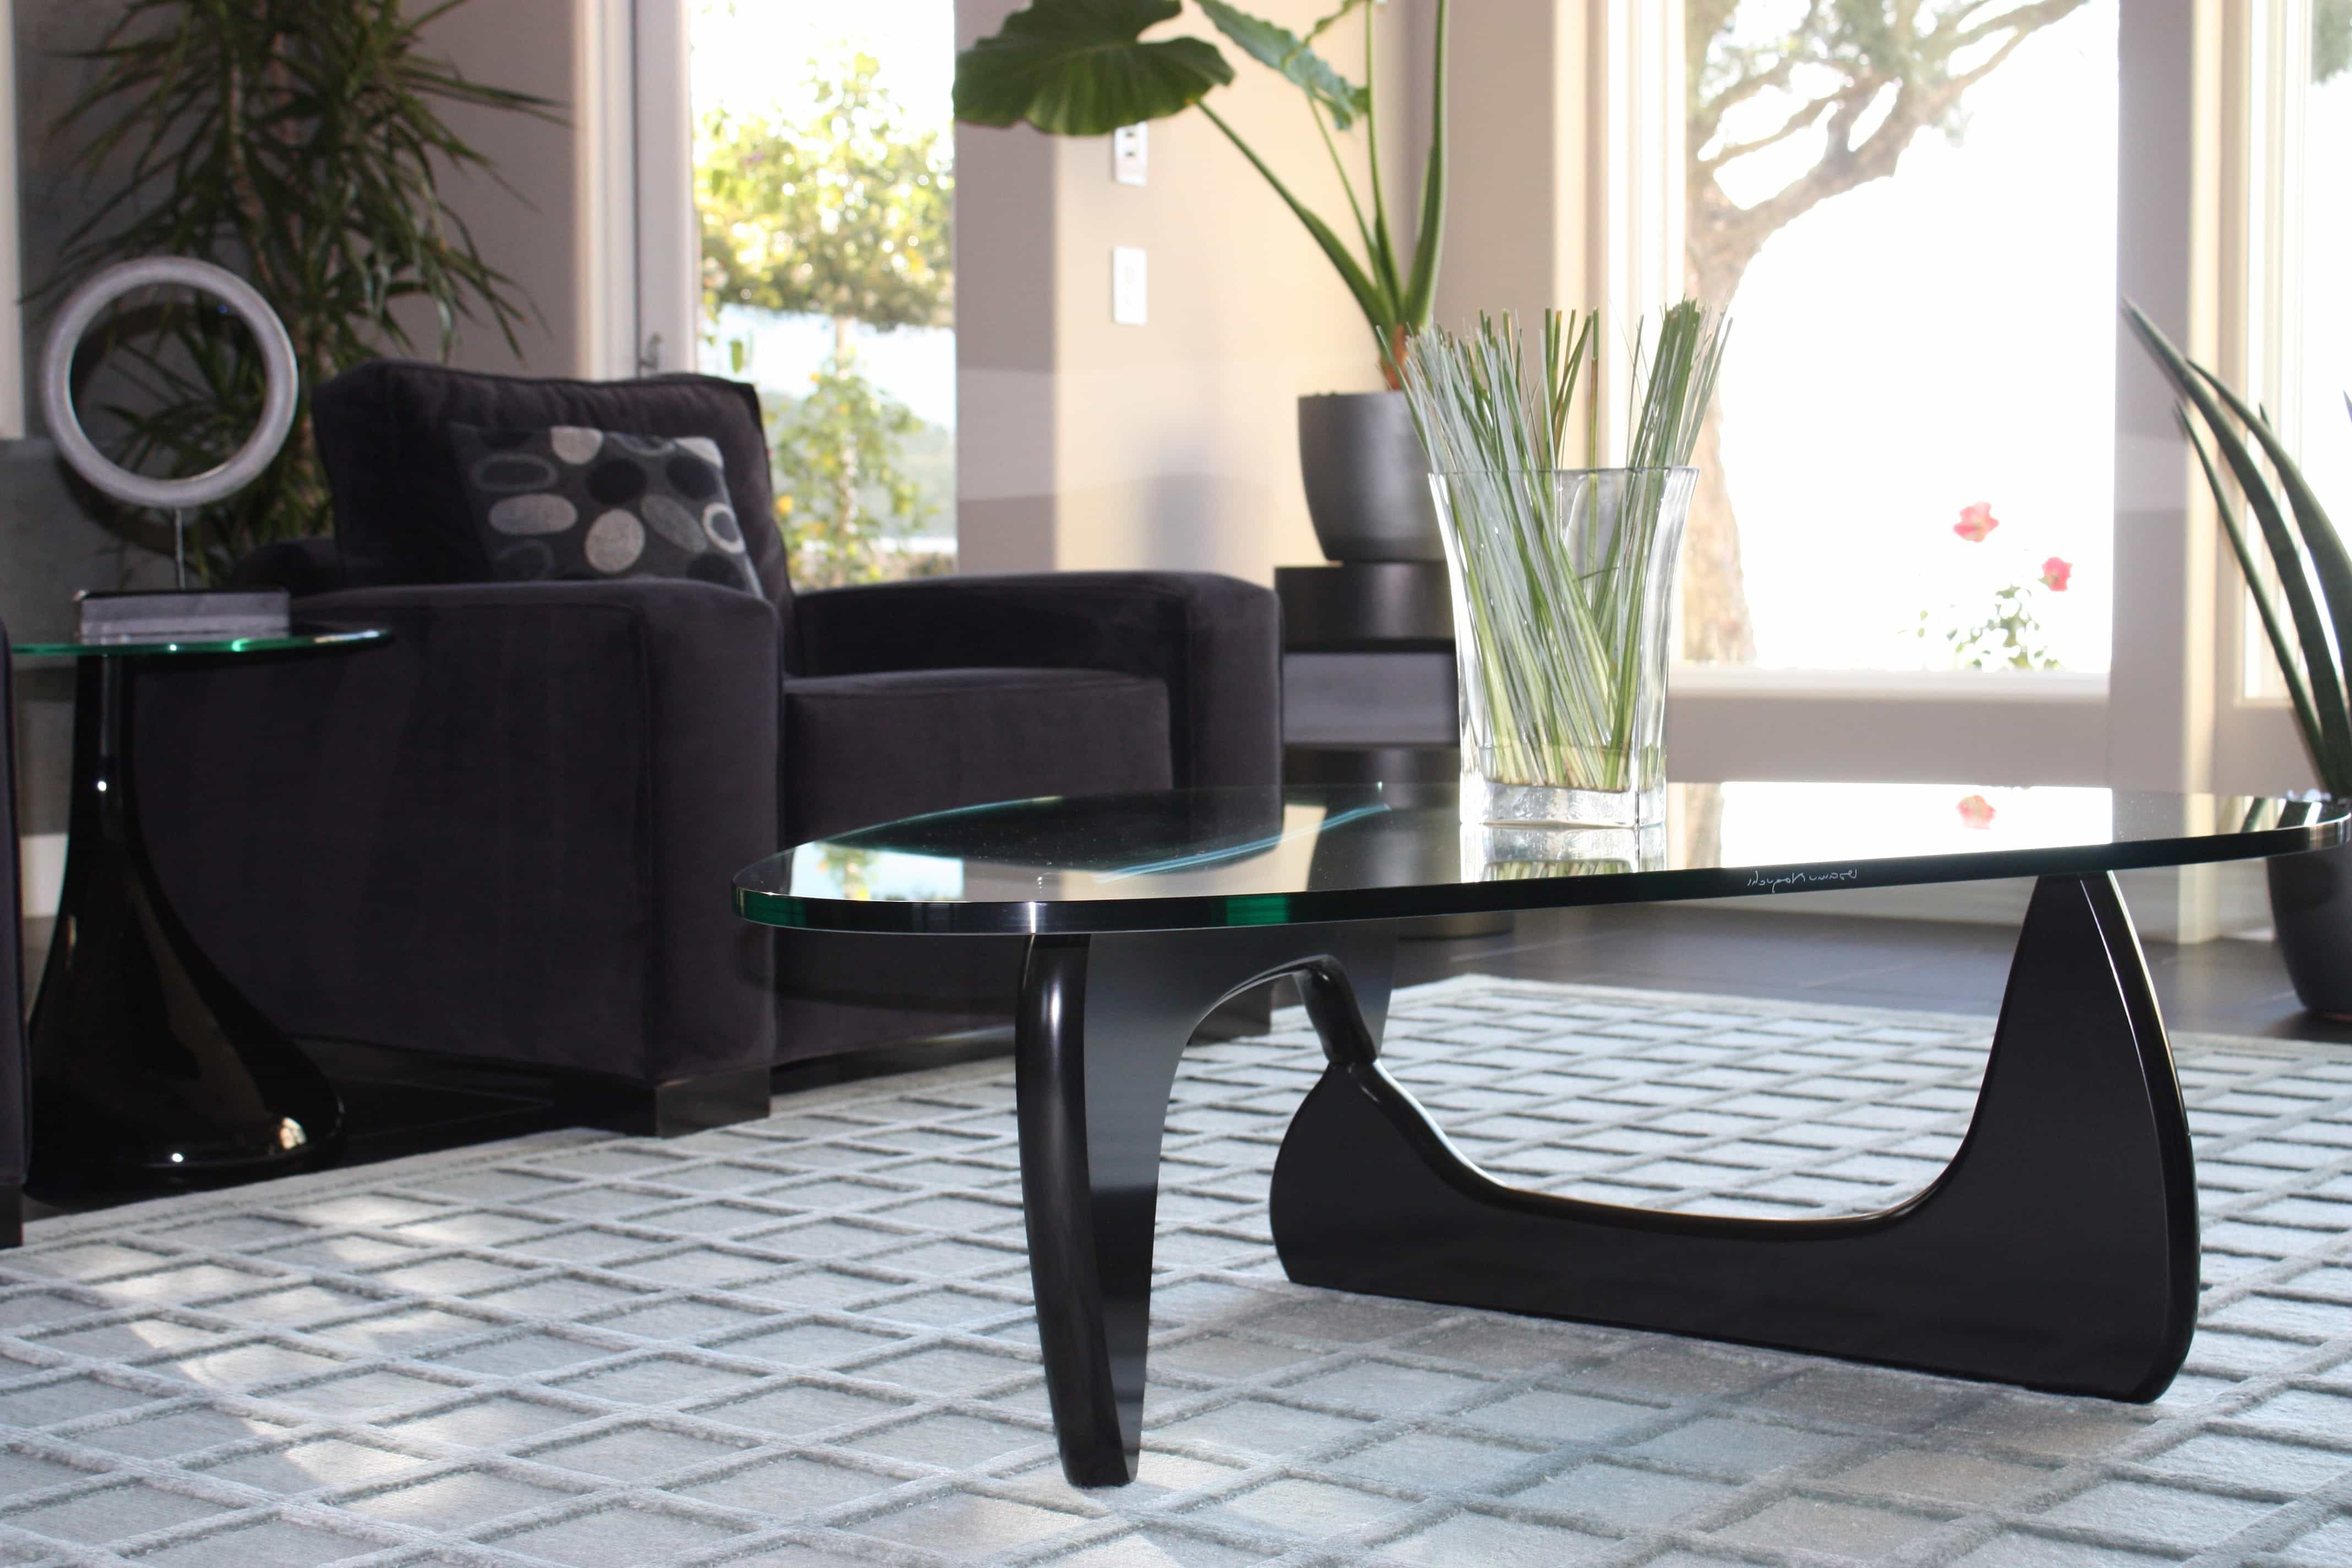 Glass Boomerang Coffee Table In Modern Living Room  (View 12 of 32)